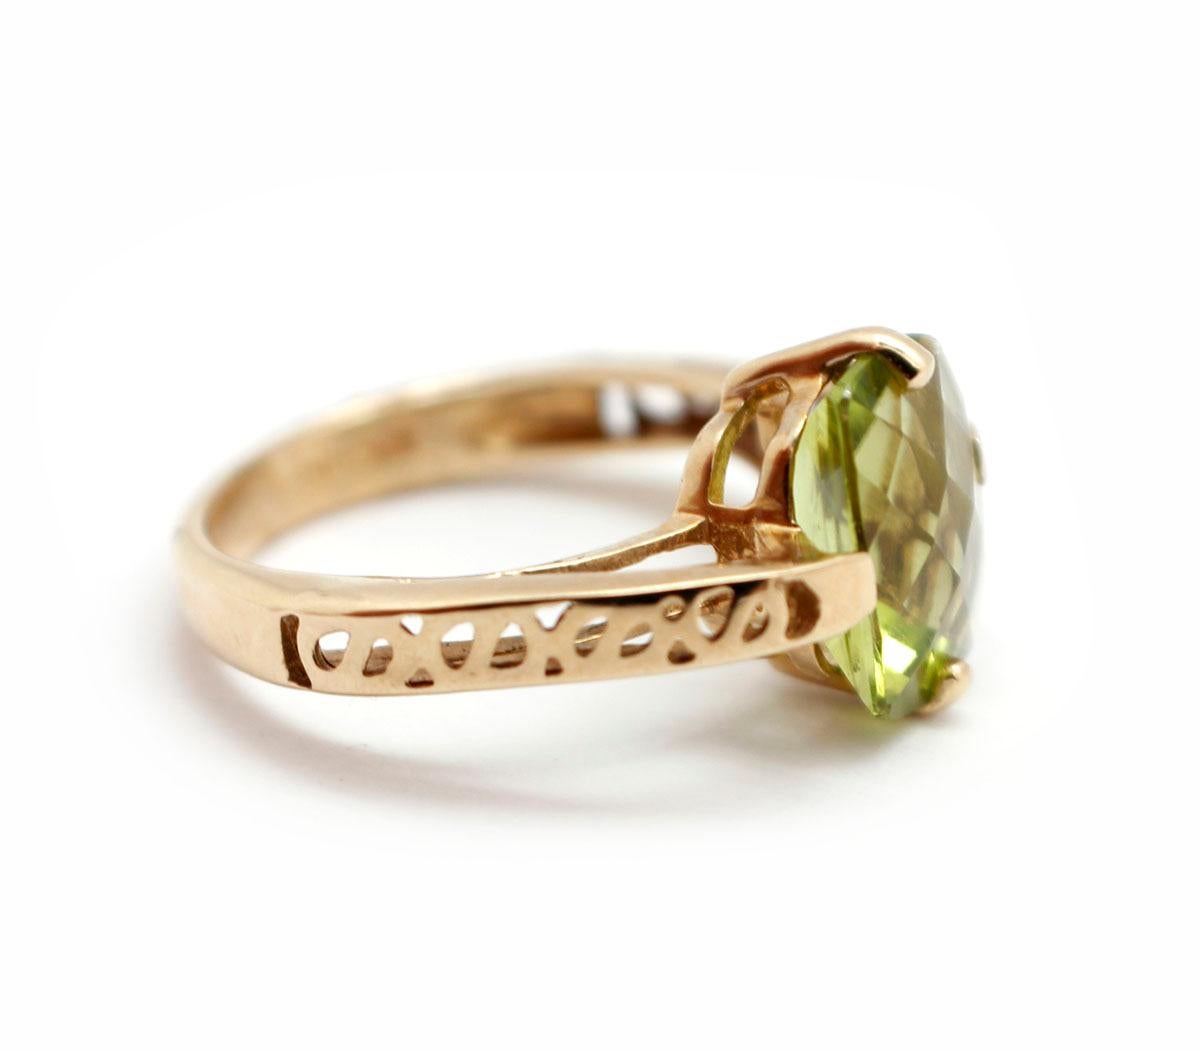 This beautiful cocktail ring is made in 10k yellow gold. The ring holds a peridot measuring 7x9mm wide. The ring weighs 2.20 grams, and it is size 3.25.